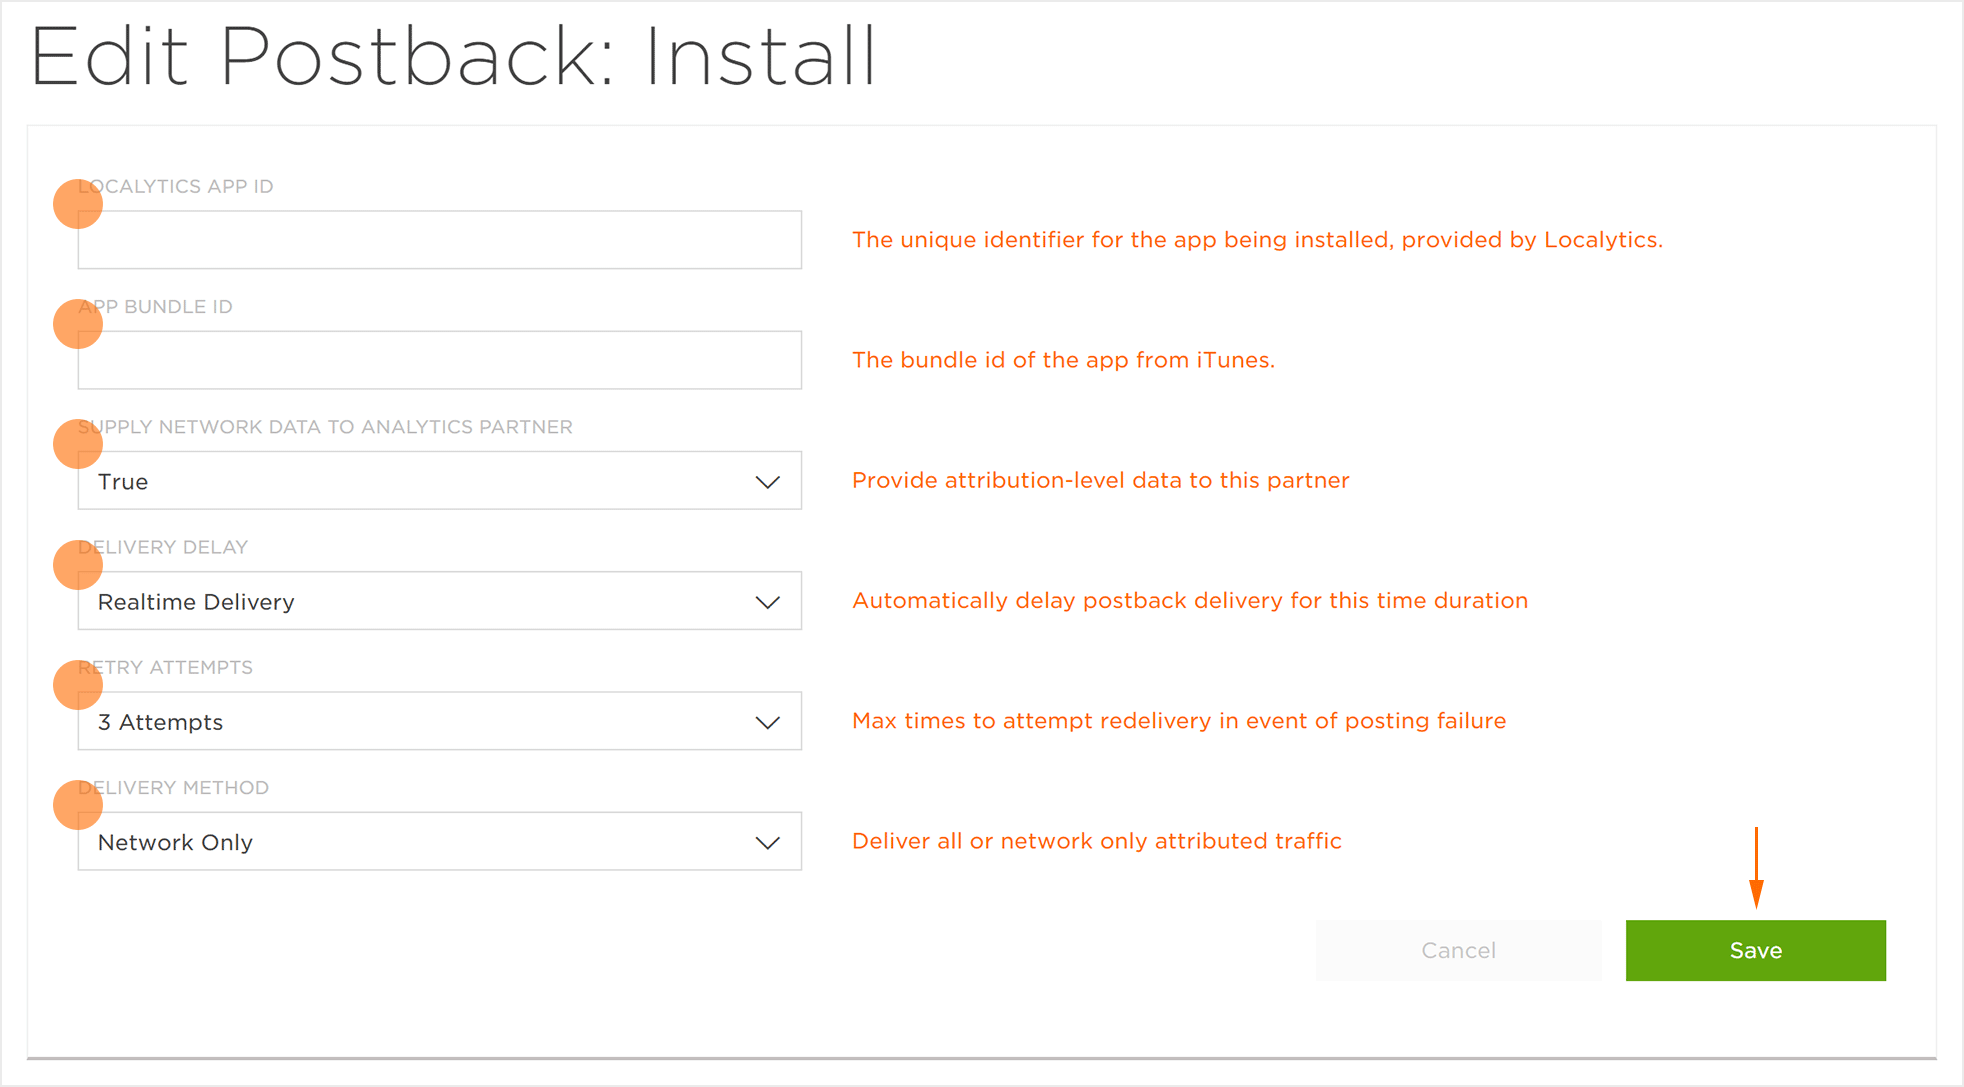 Acquisition Postback Settings